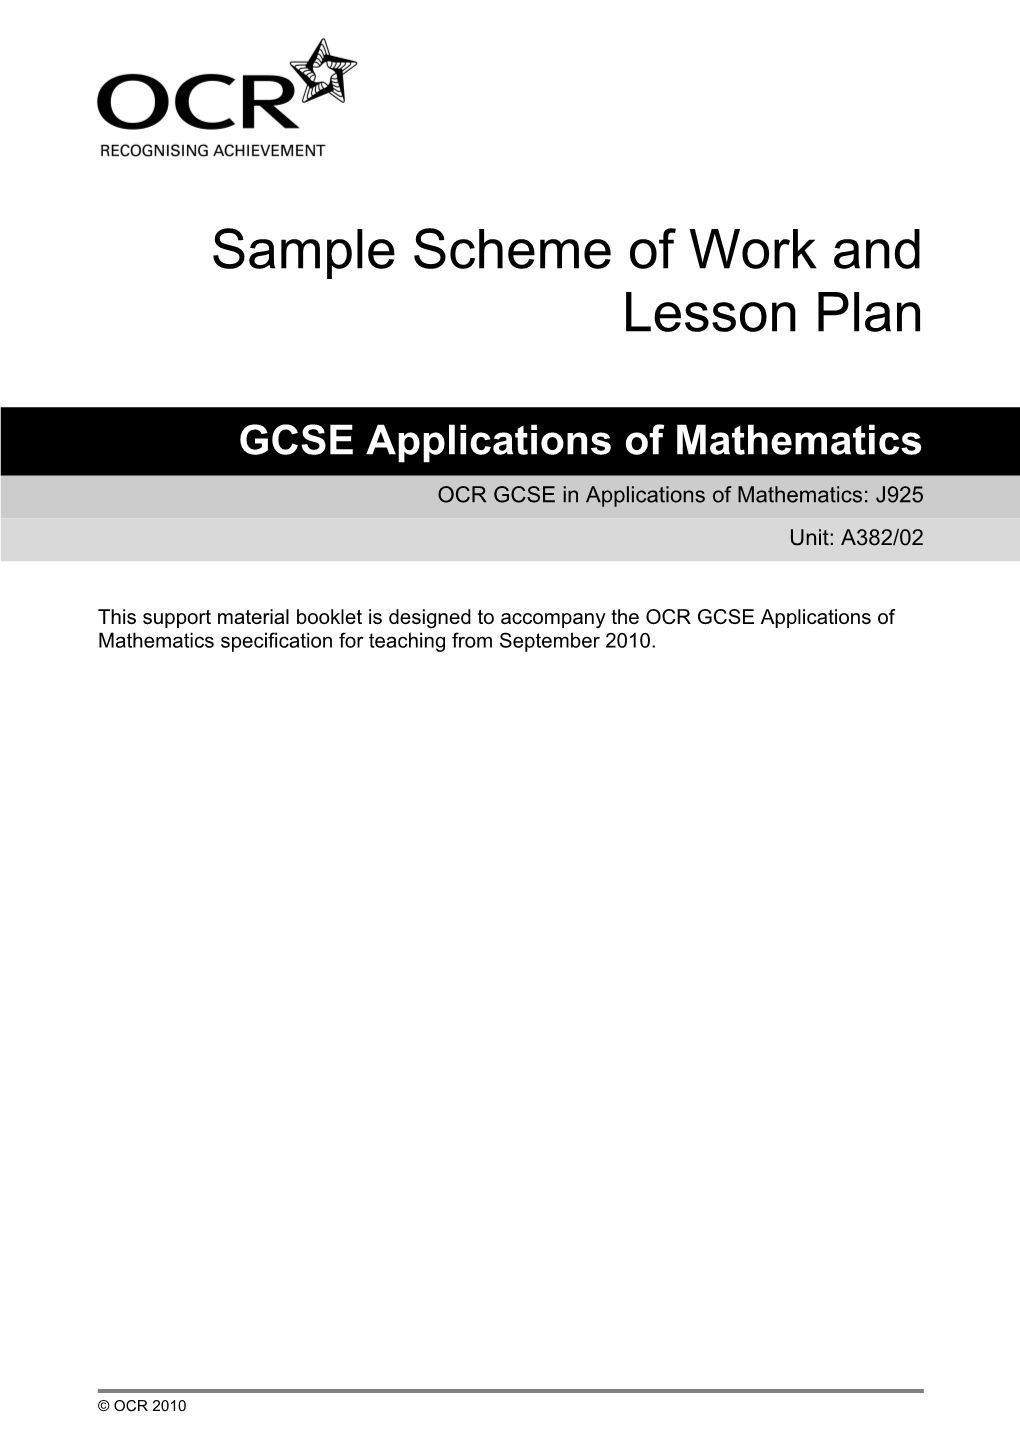 Sample Scheme of Work and Lesson Plan